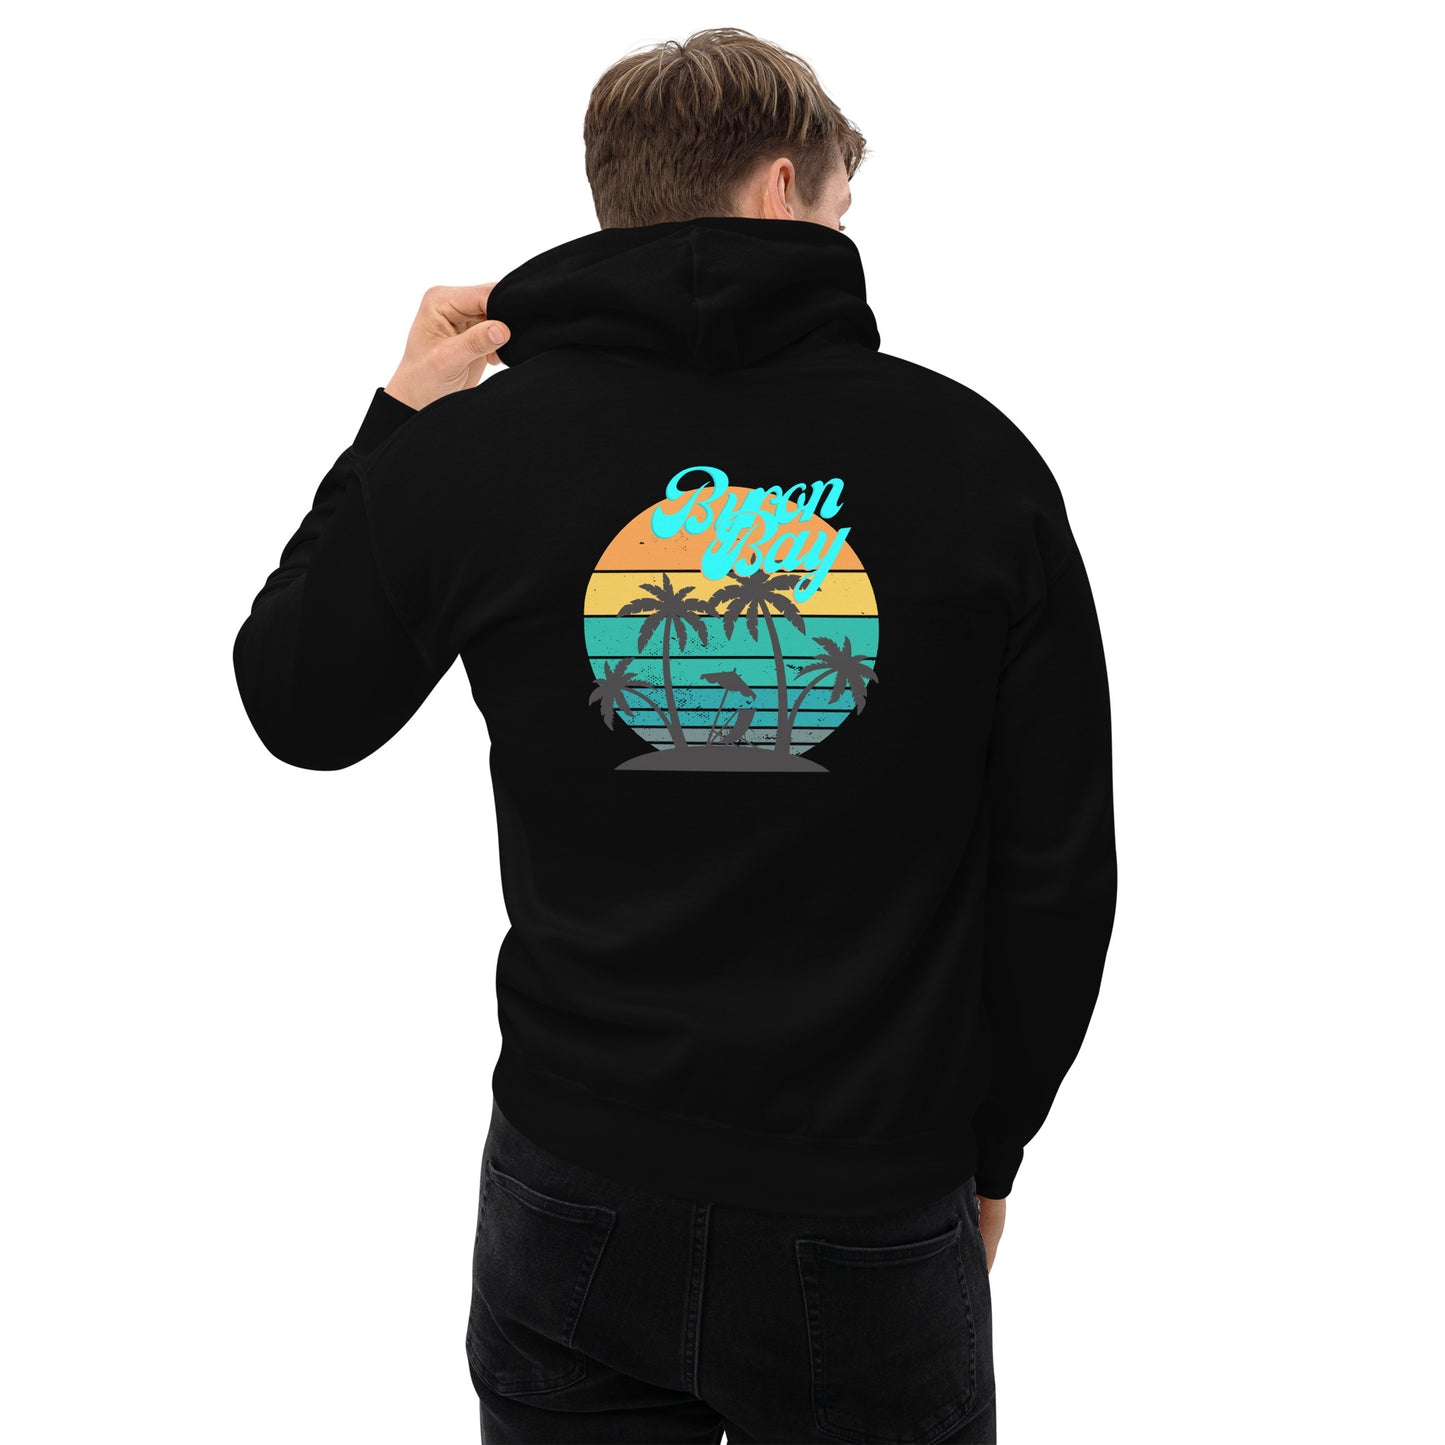  Unisex Hoodie - Black - Back view being warn by man with one hand holding the hood - Byron Bay design on back, plain front with pouch pocket - Genuine Byron Bay Merchandise | Produced by Go Sea Kayak Byron Bay 